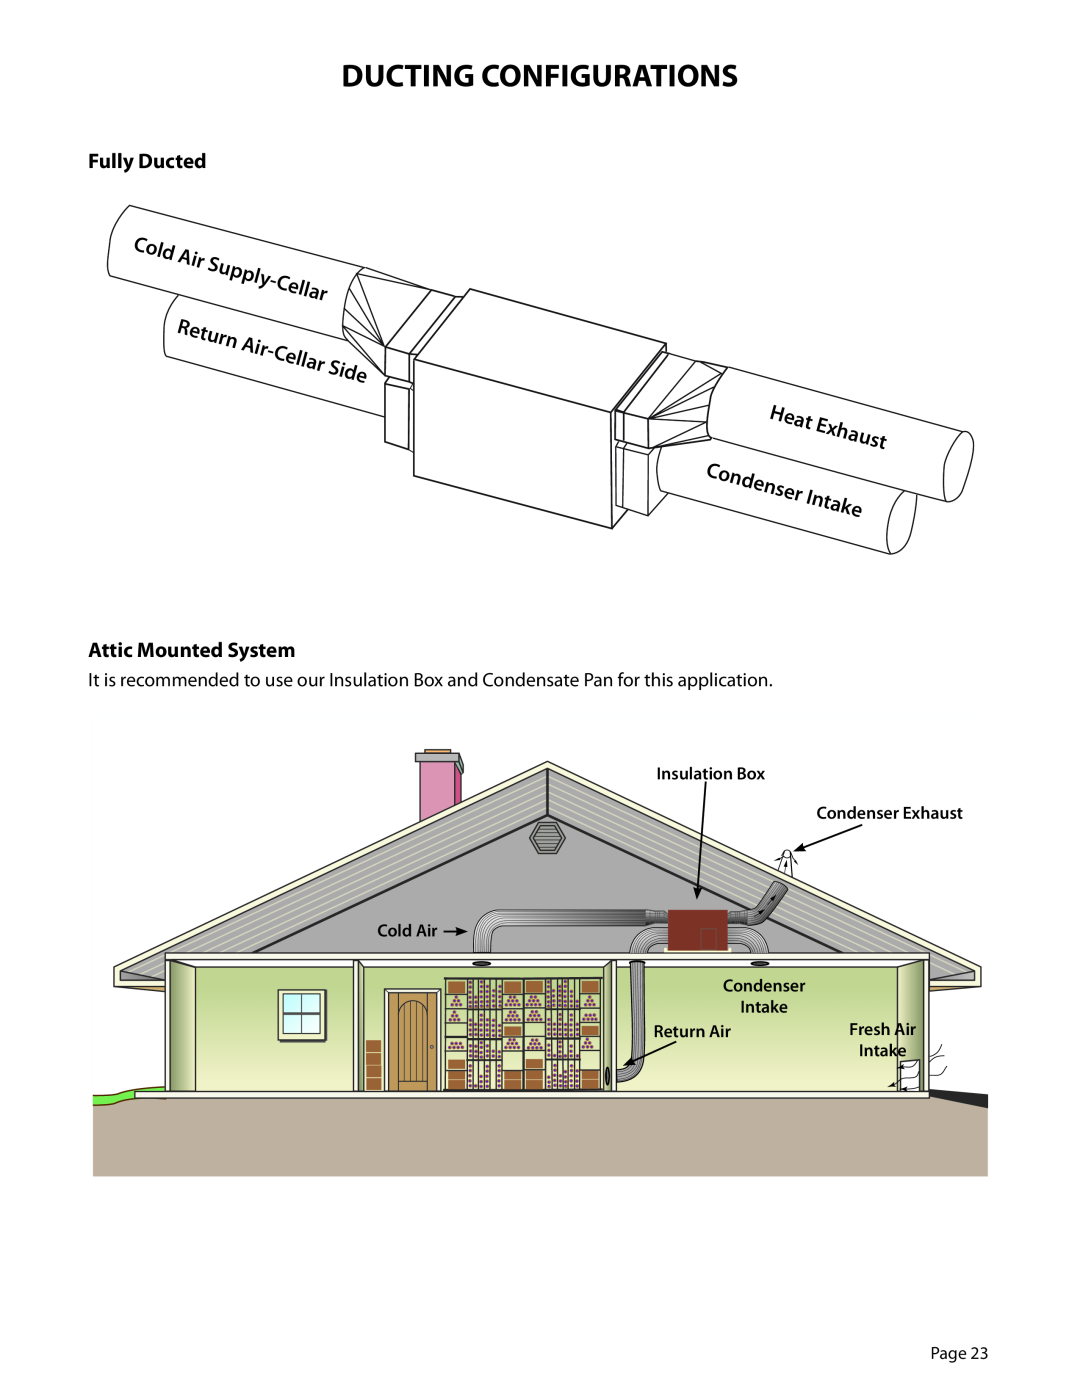 WhisperKool 5000 Cold, Supply, Return, Side, Heat, Condenser, Intake, Fully Ducted, Attic Mounted System, Cellar, Exhaust 